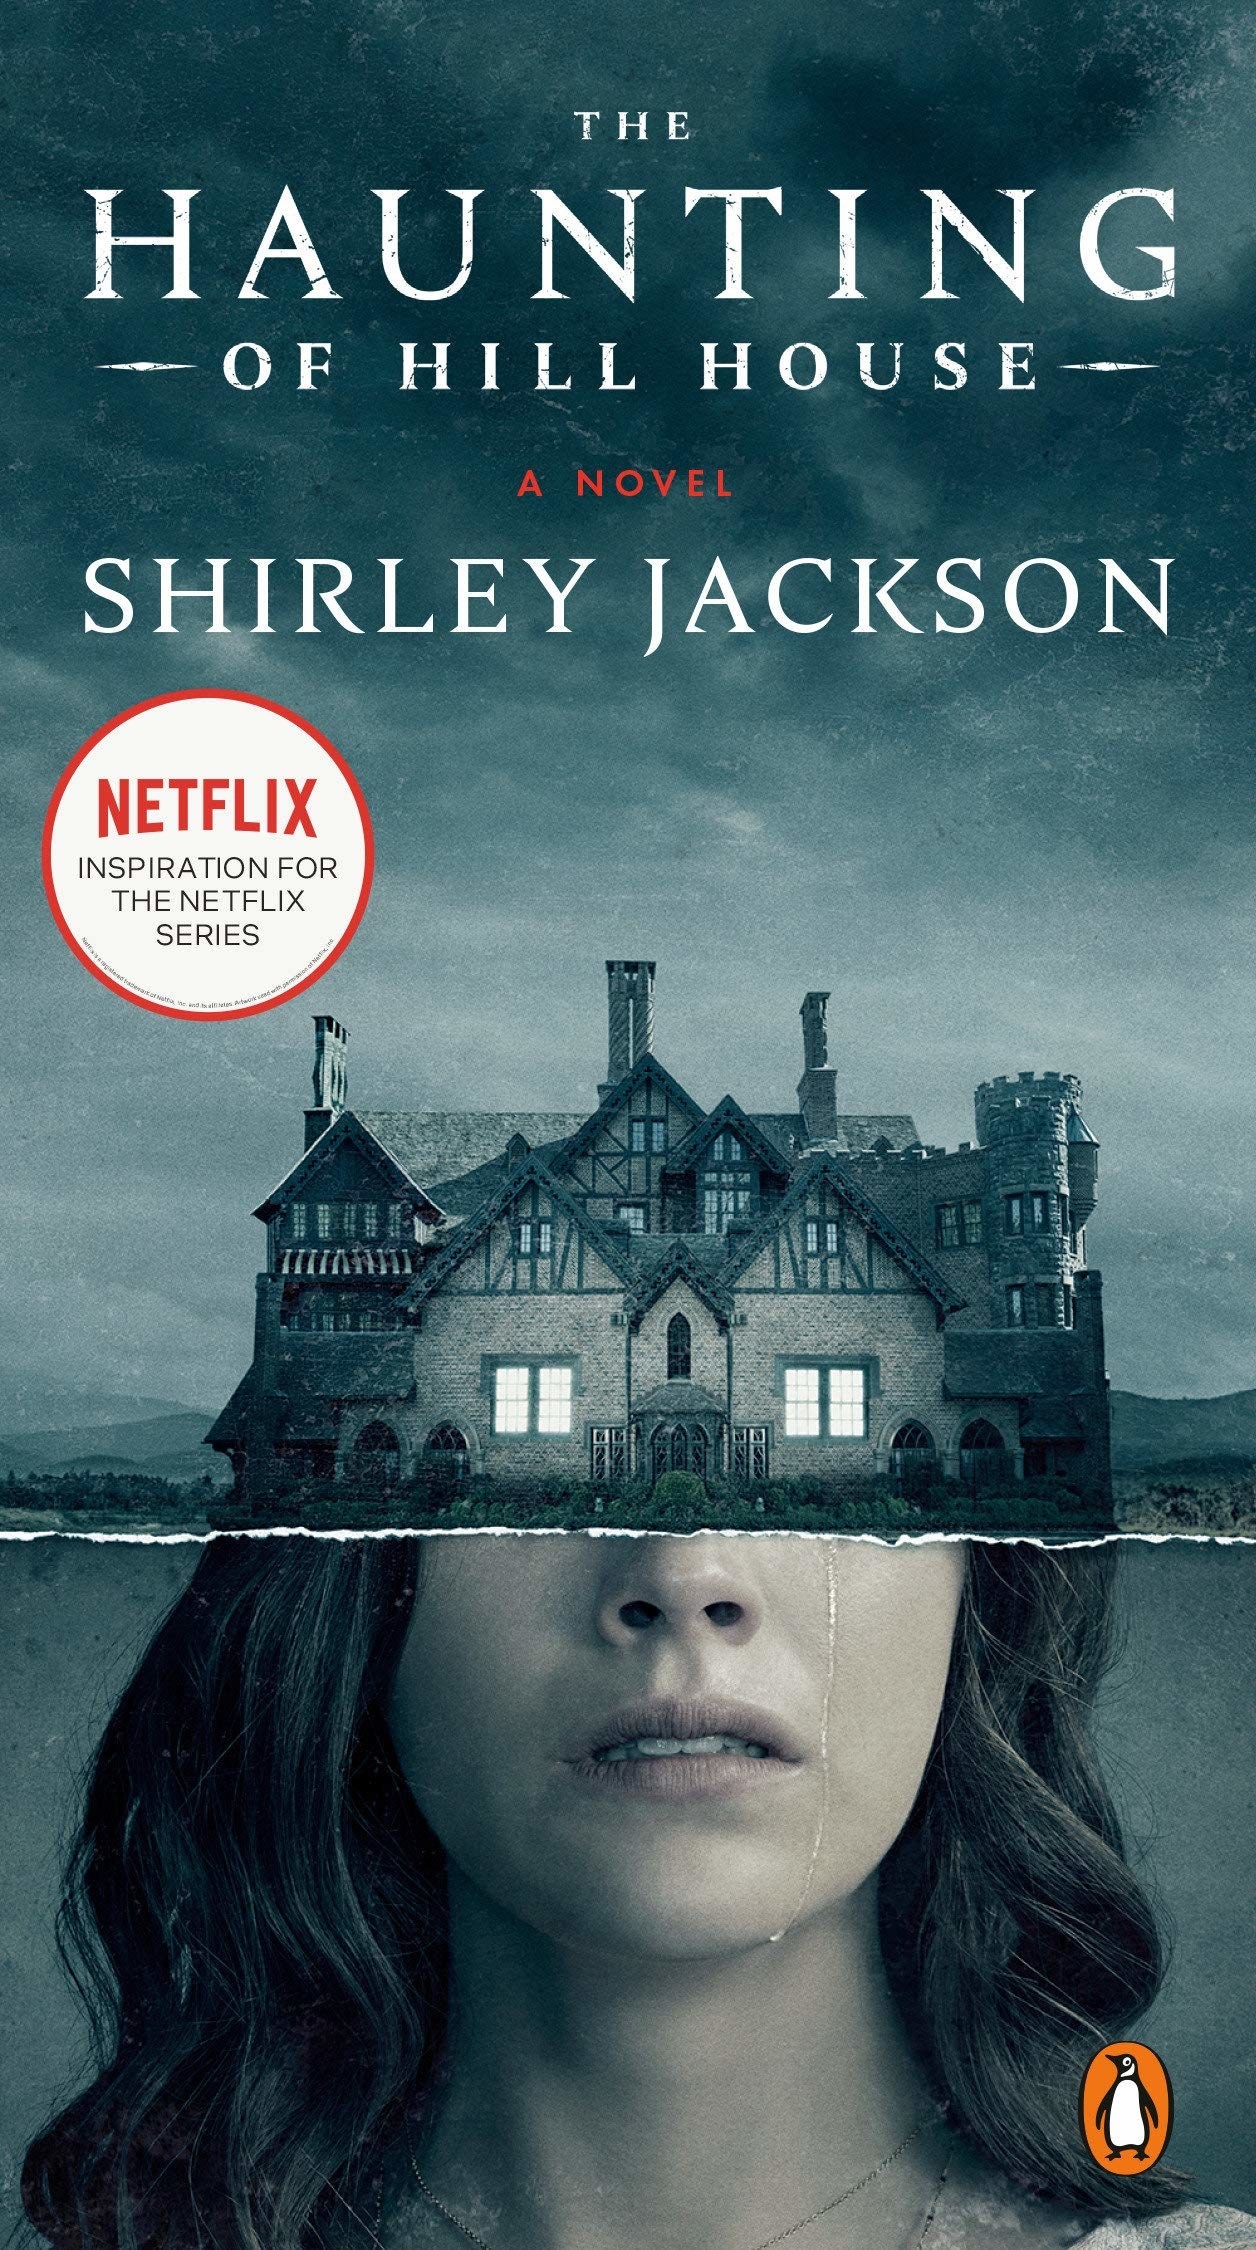 &quot;The Haunting of Hill House&quot; by Shirley Jackson